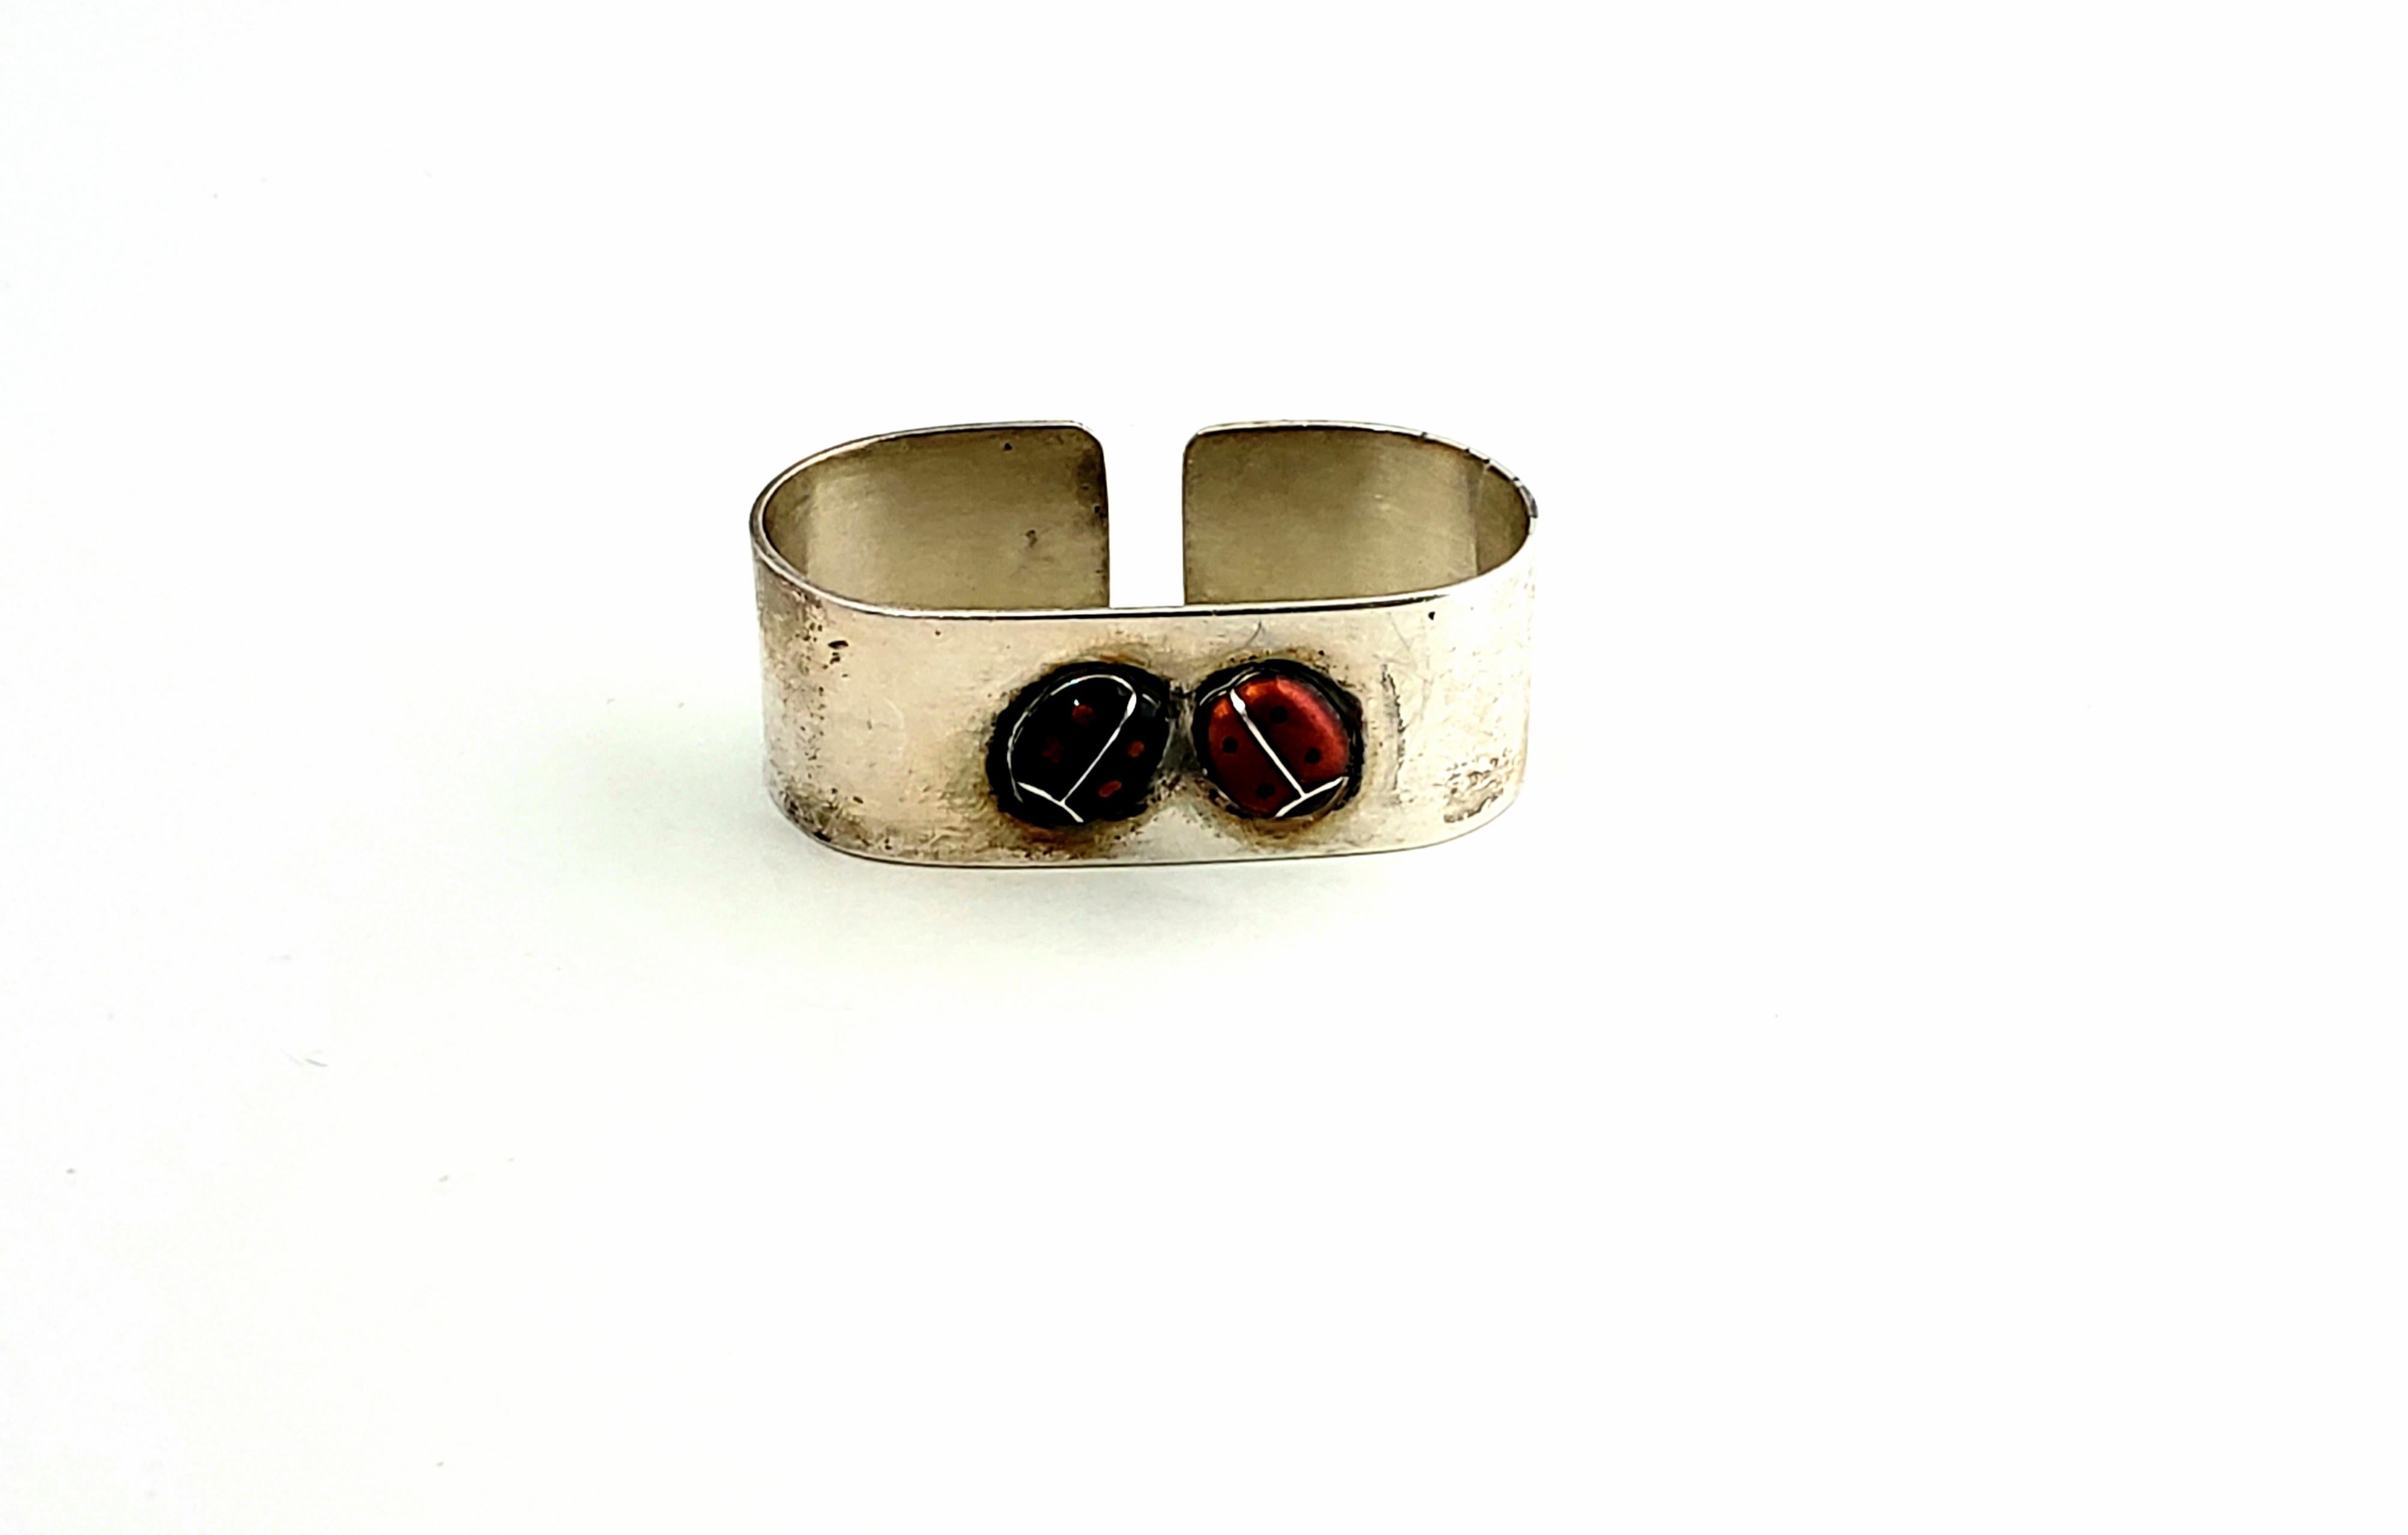 Anton Michelsen Denmark Sterling Silver Child's Ladybug Napkin Ring

This is a fun and adorable sterling silver Child's Napkin Ring featuring Enamel Ladybugs designed by Anton Michelsen.

Measurements:  1 3/4